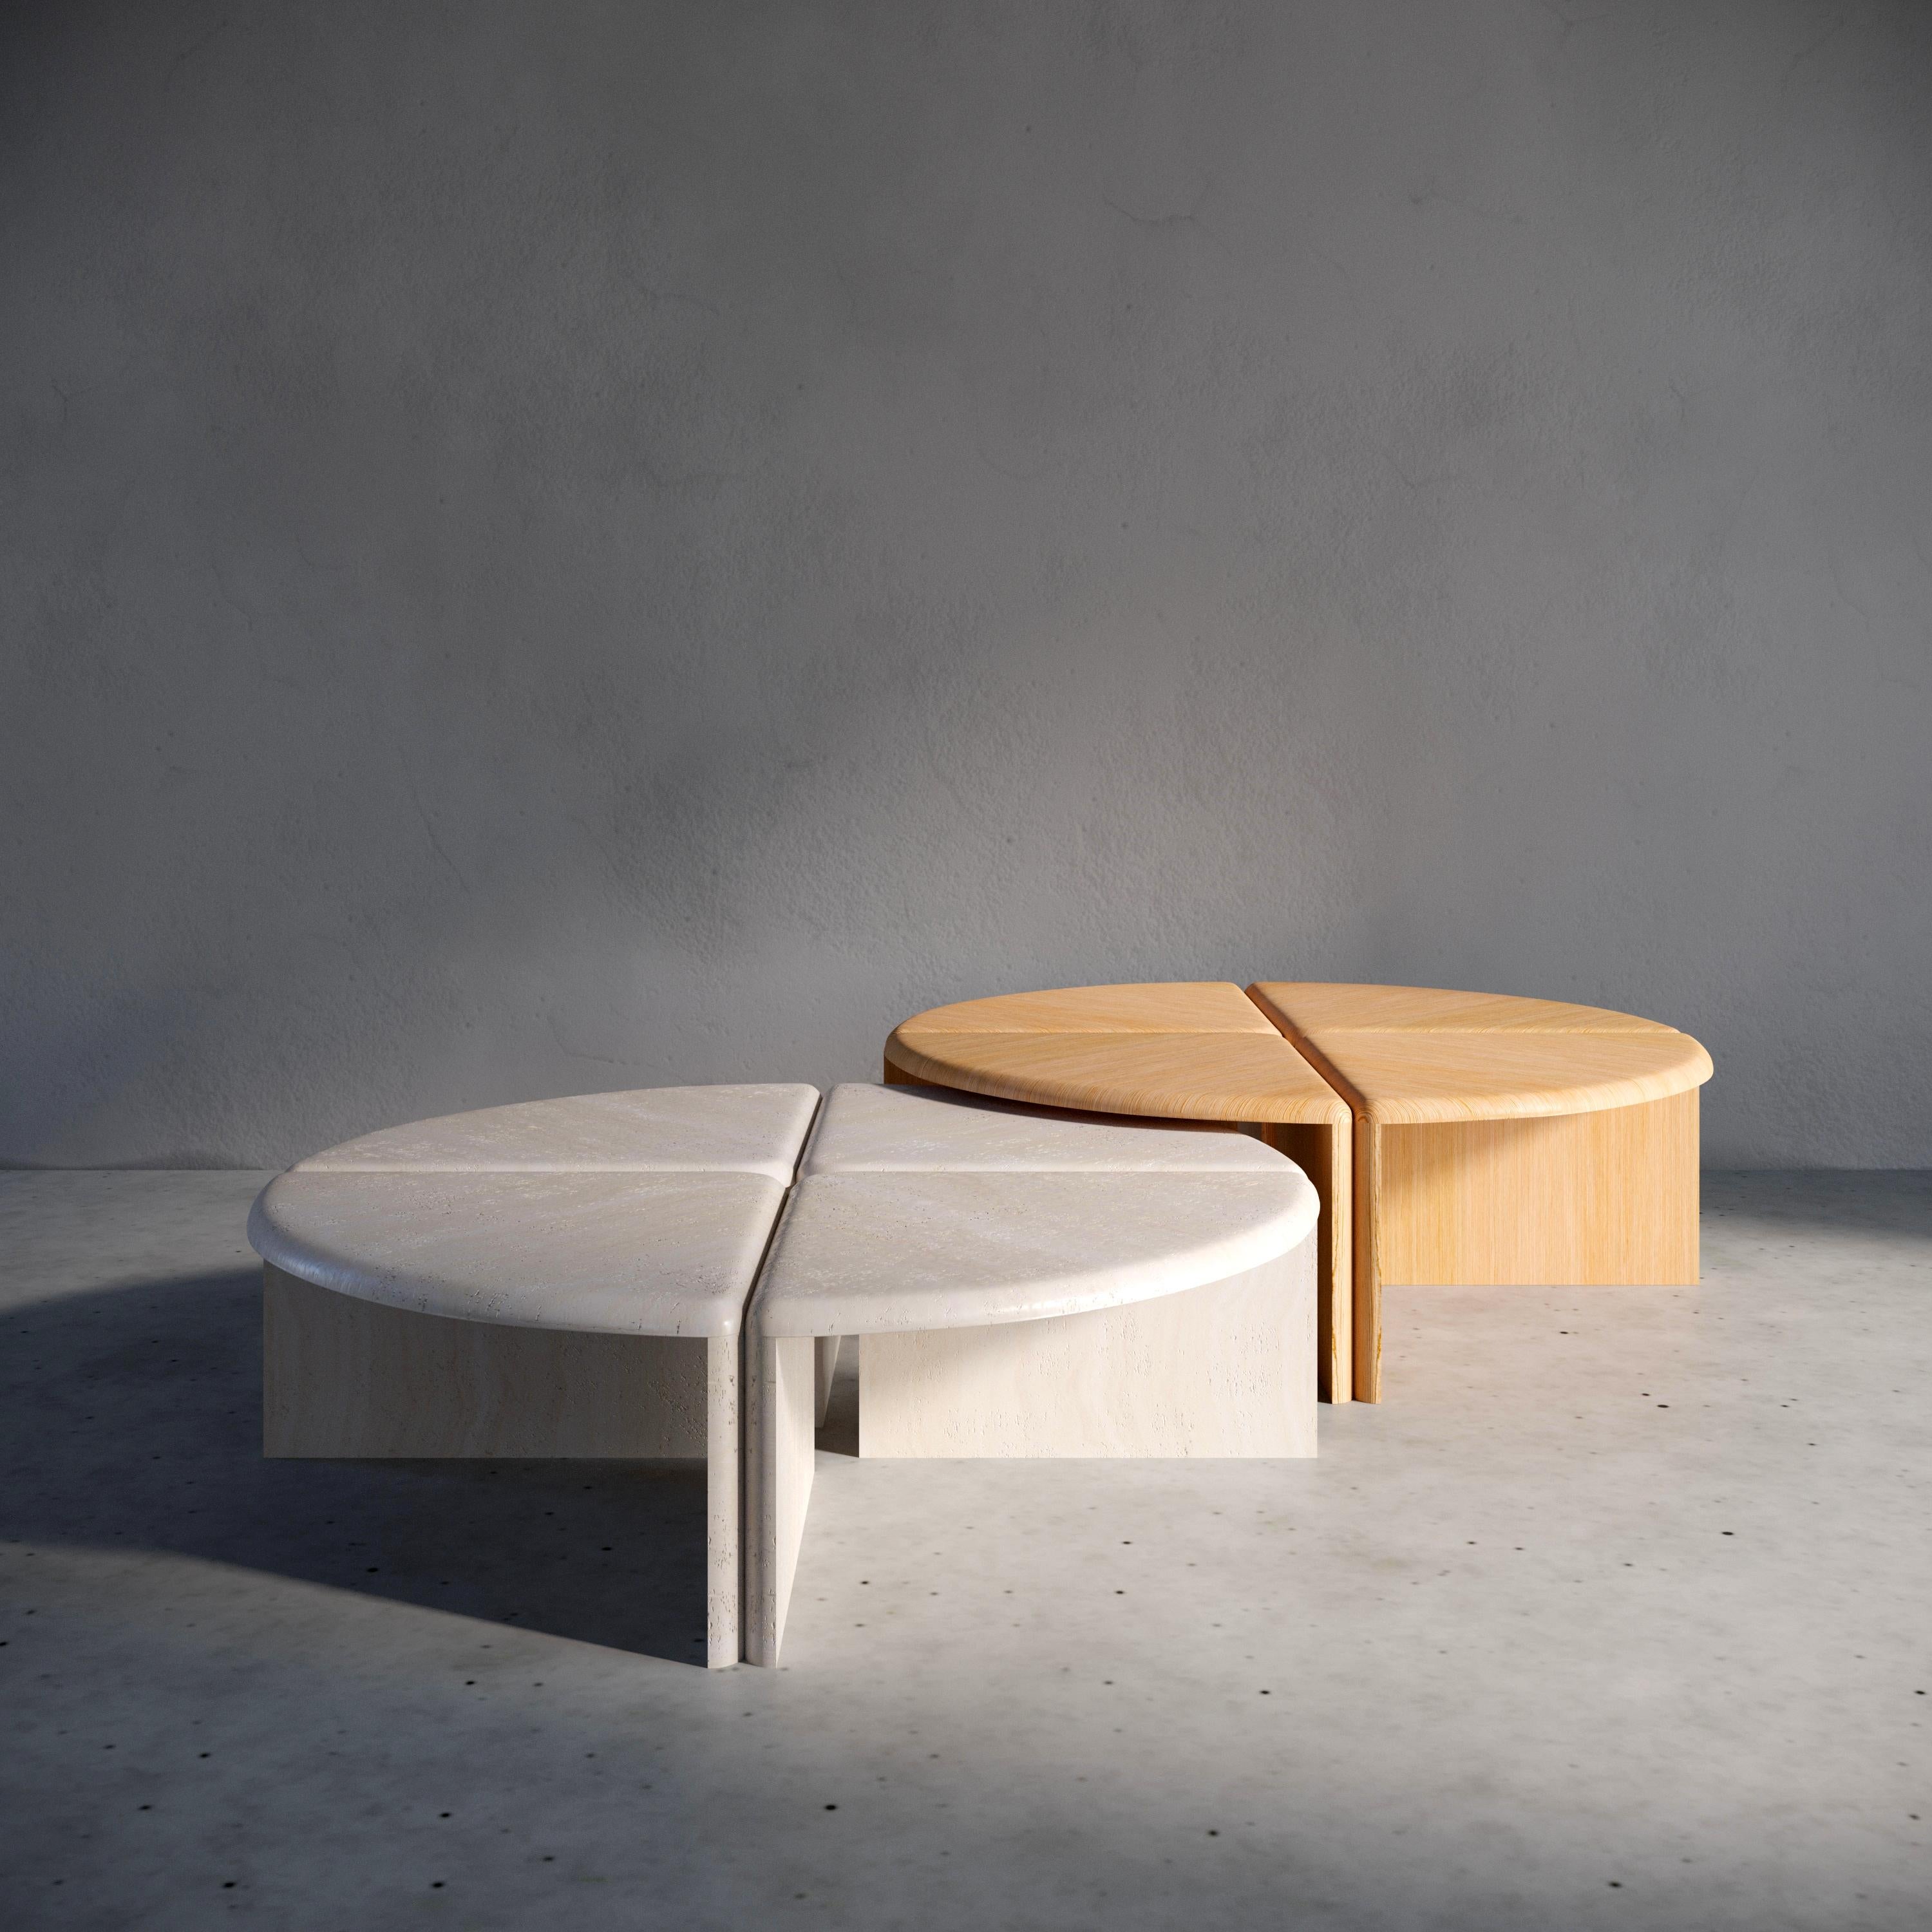 Hand-Crafted Lily Round Coffee Table in Honed Unfilled Navona Travertine by Fred&Juul For Sale